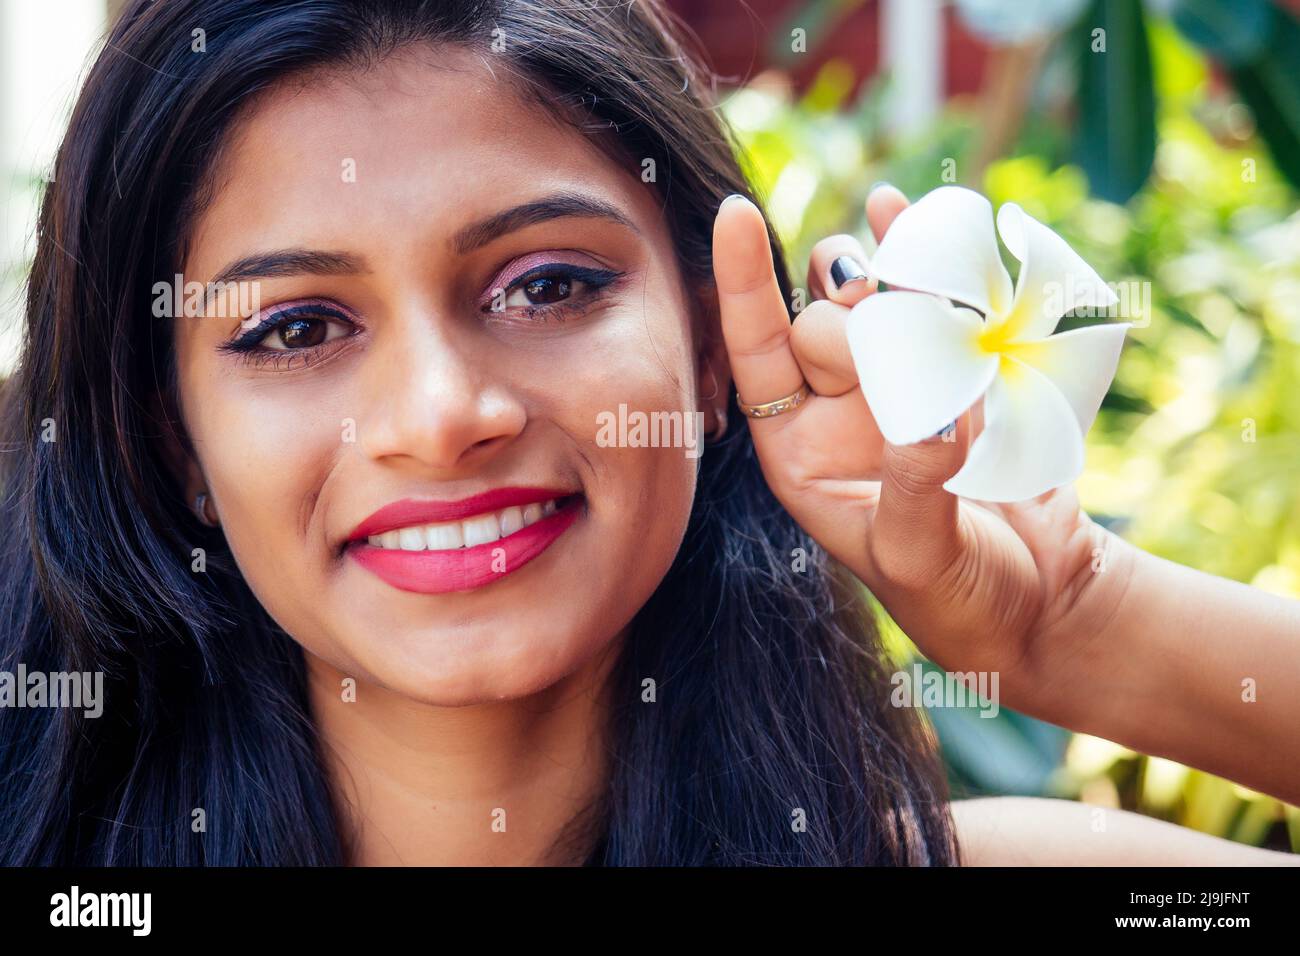 Closeup headshot portrait of attitude confident smiling happy pretty young woman background of blurred trees, plumeria flowers. Positive human emotion Stock Photo